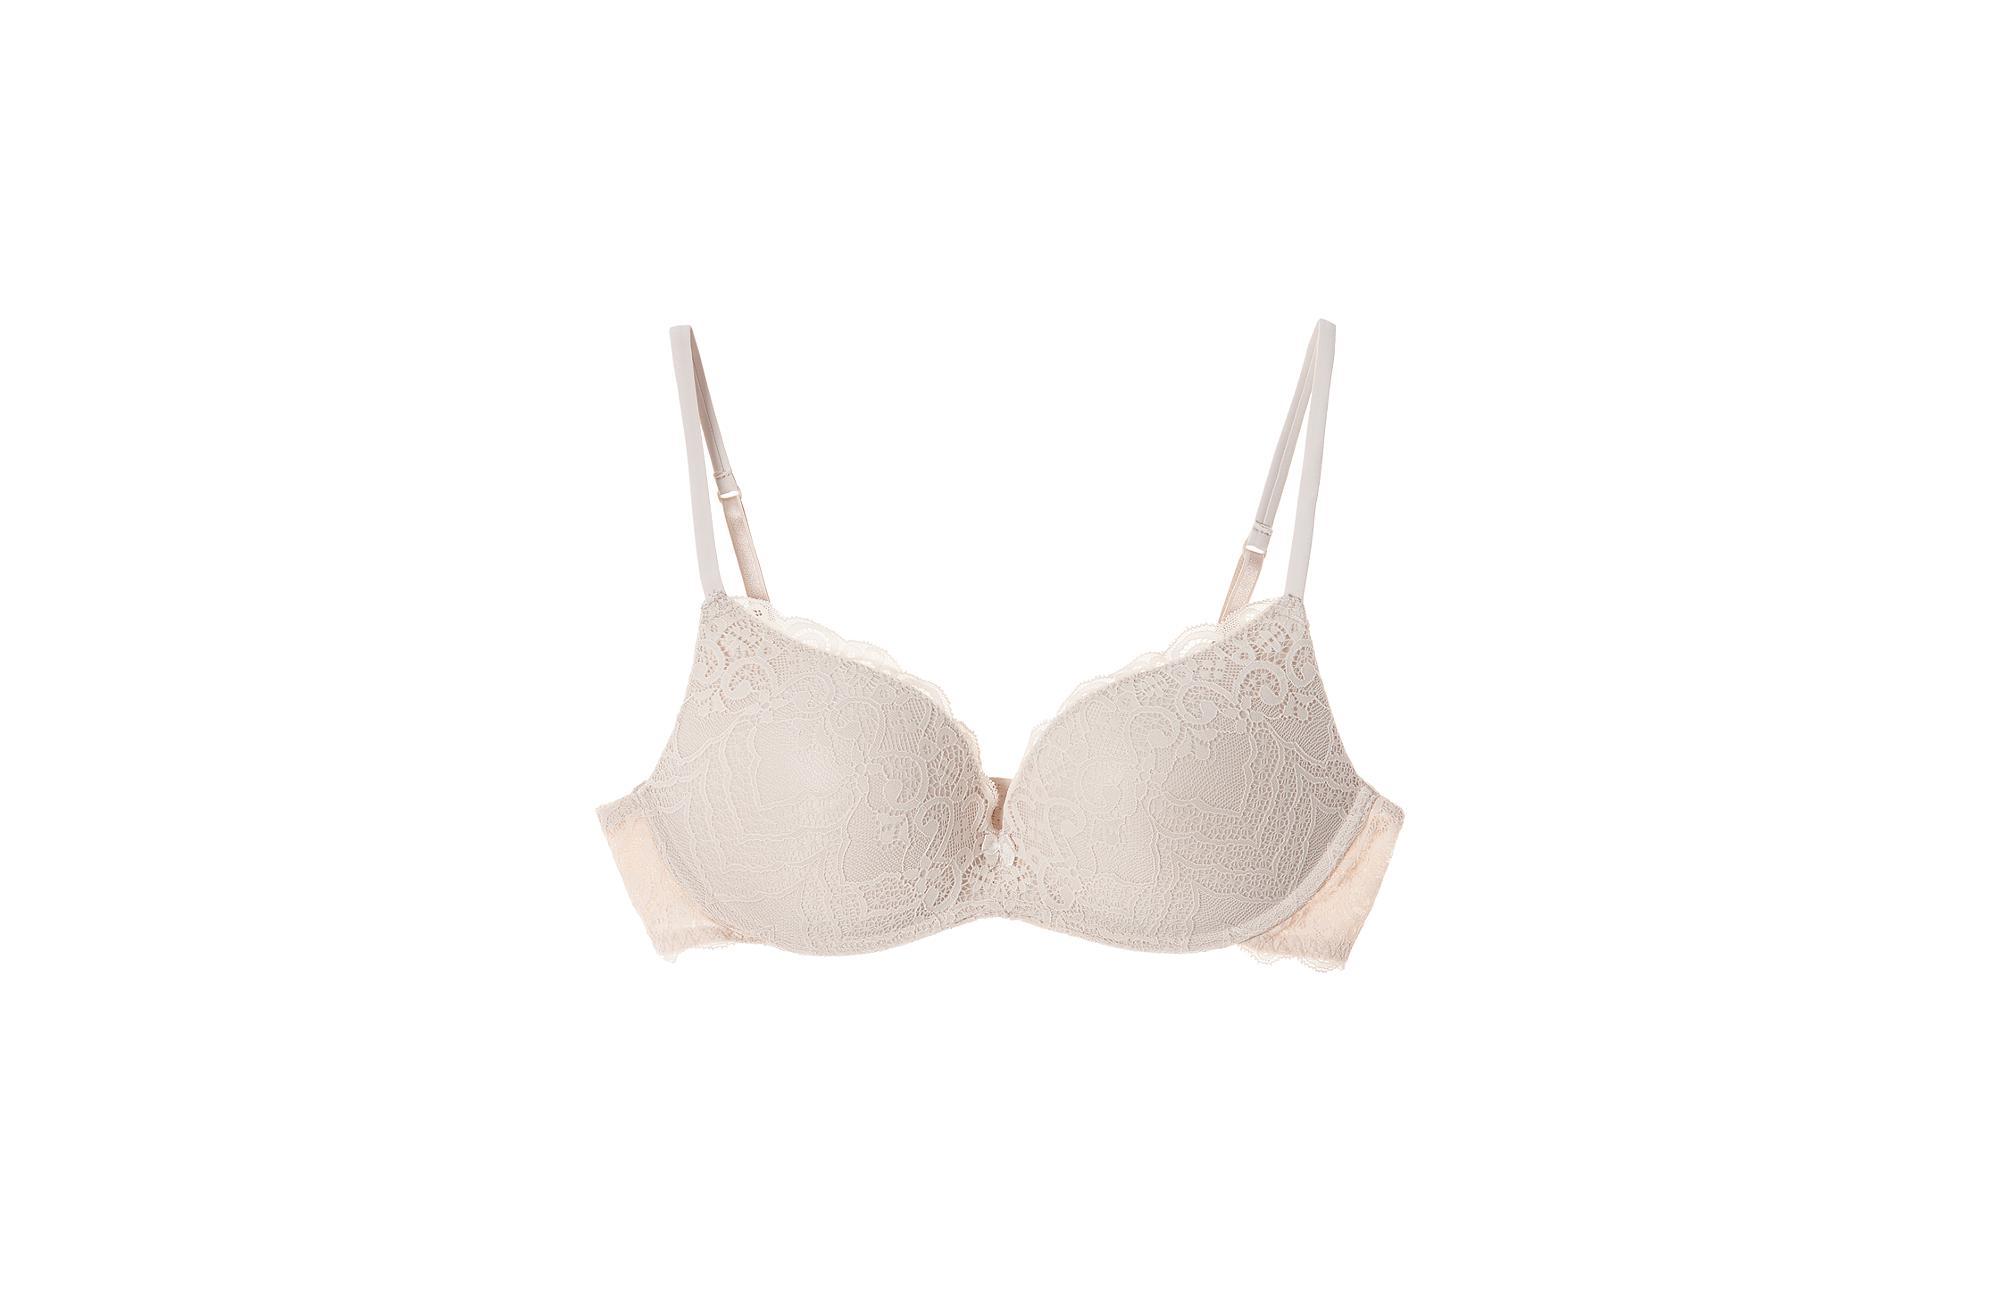 Intimissimi Manuela Lace Push-up Bra in Nude (Natural) - Lyst